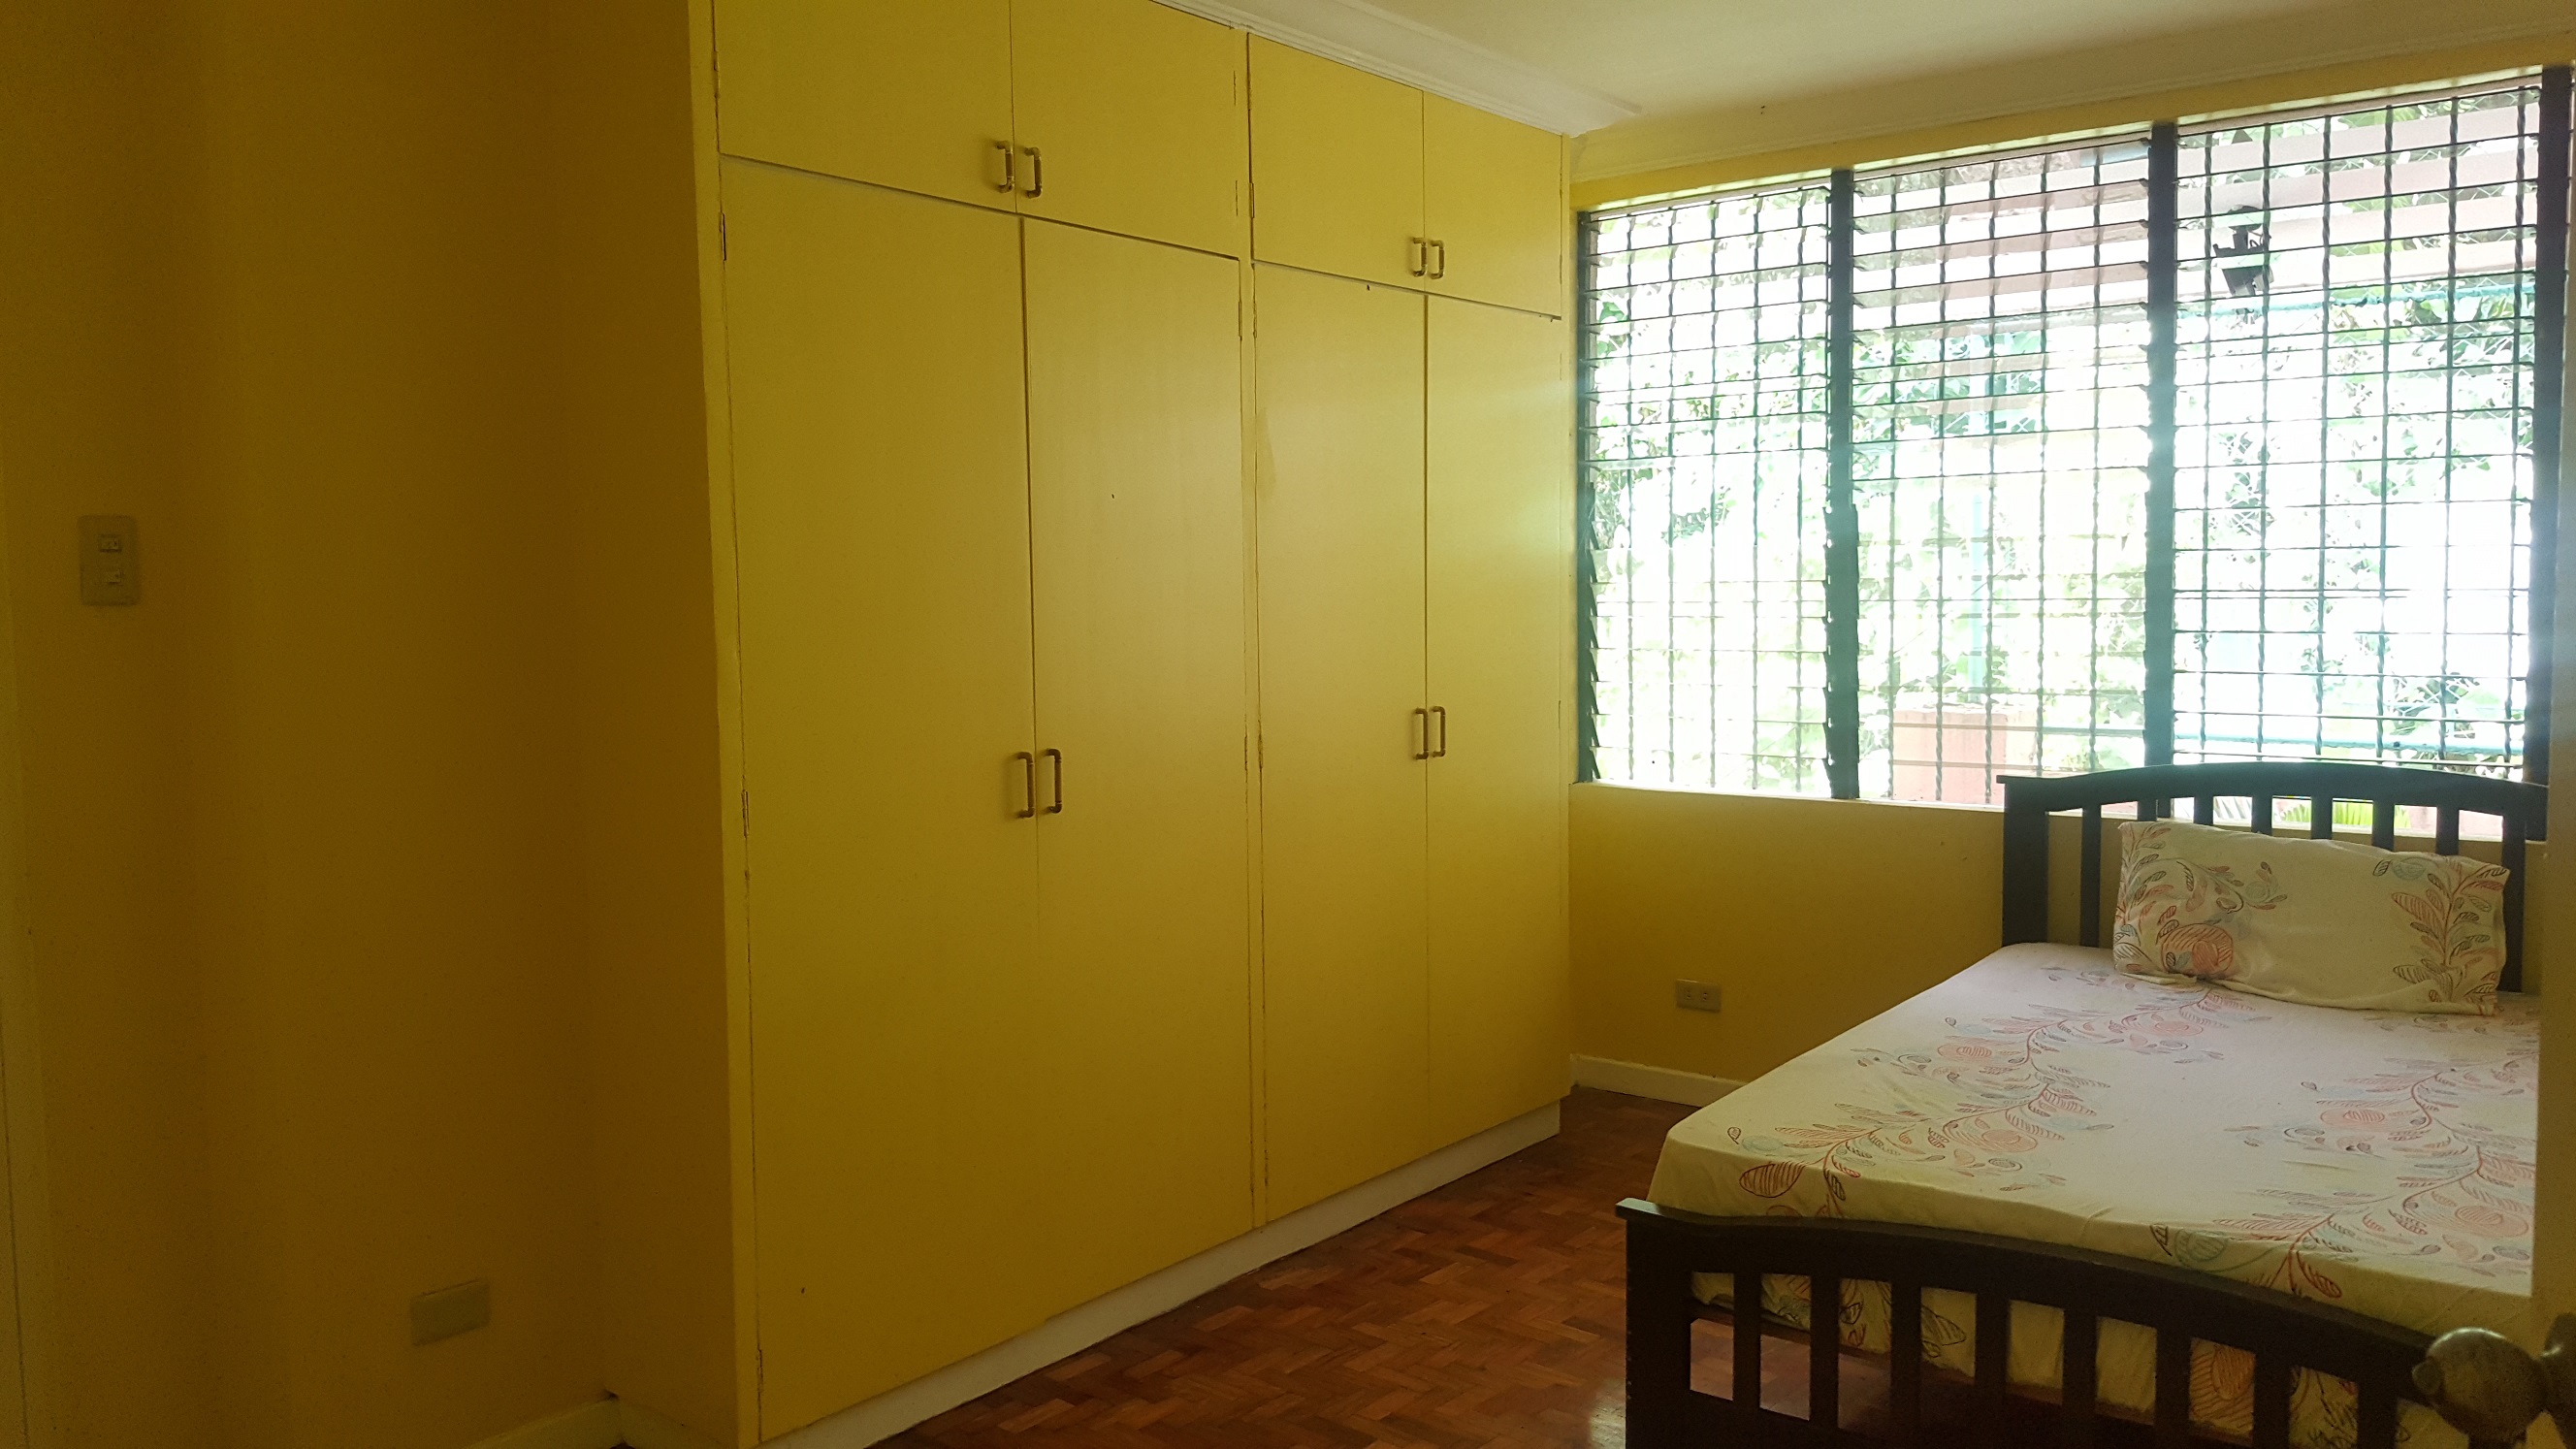 3-storey-house-with-5-bedrooms-located-in-banilad-cebu-city